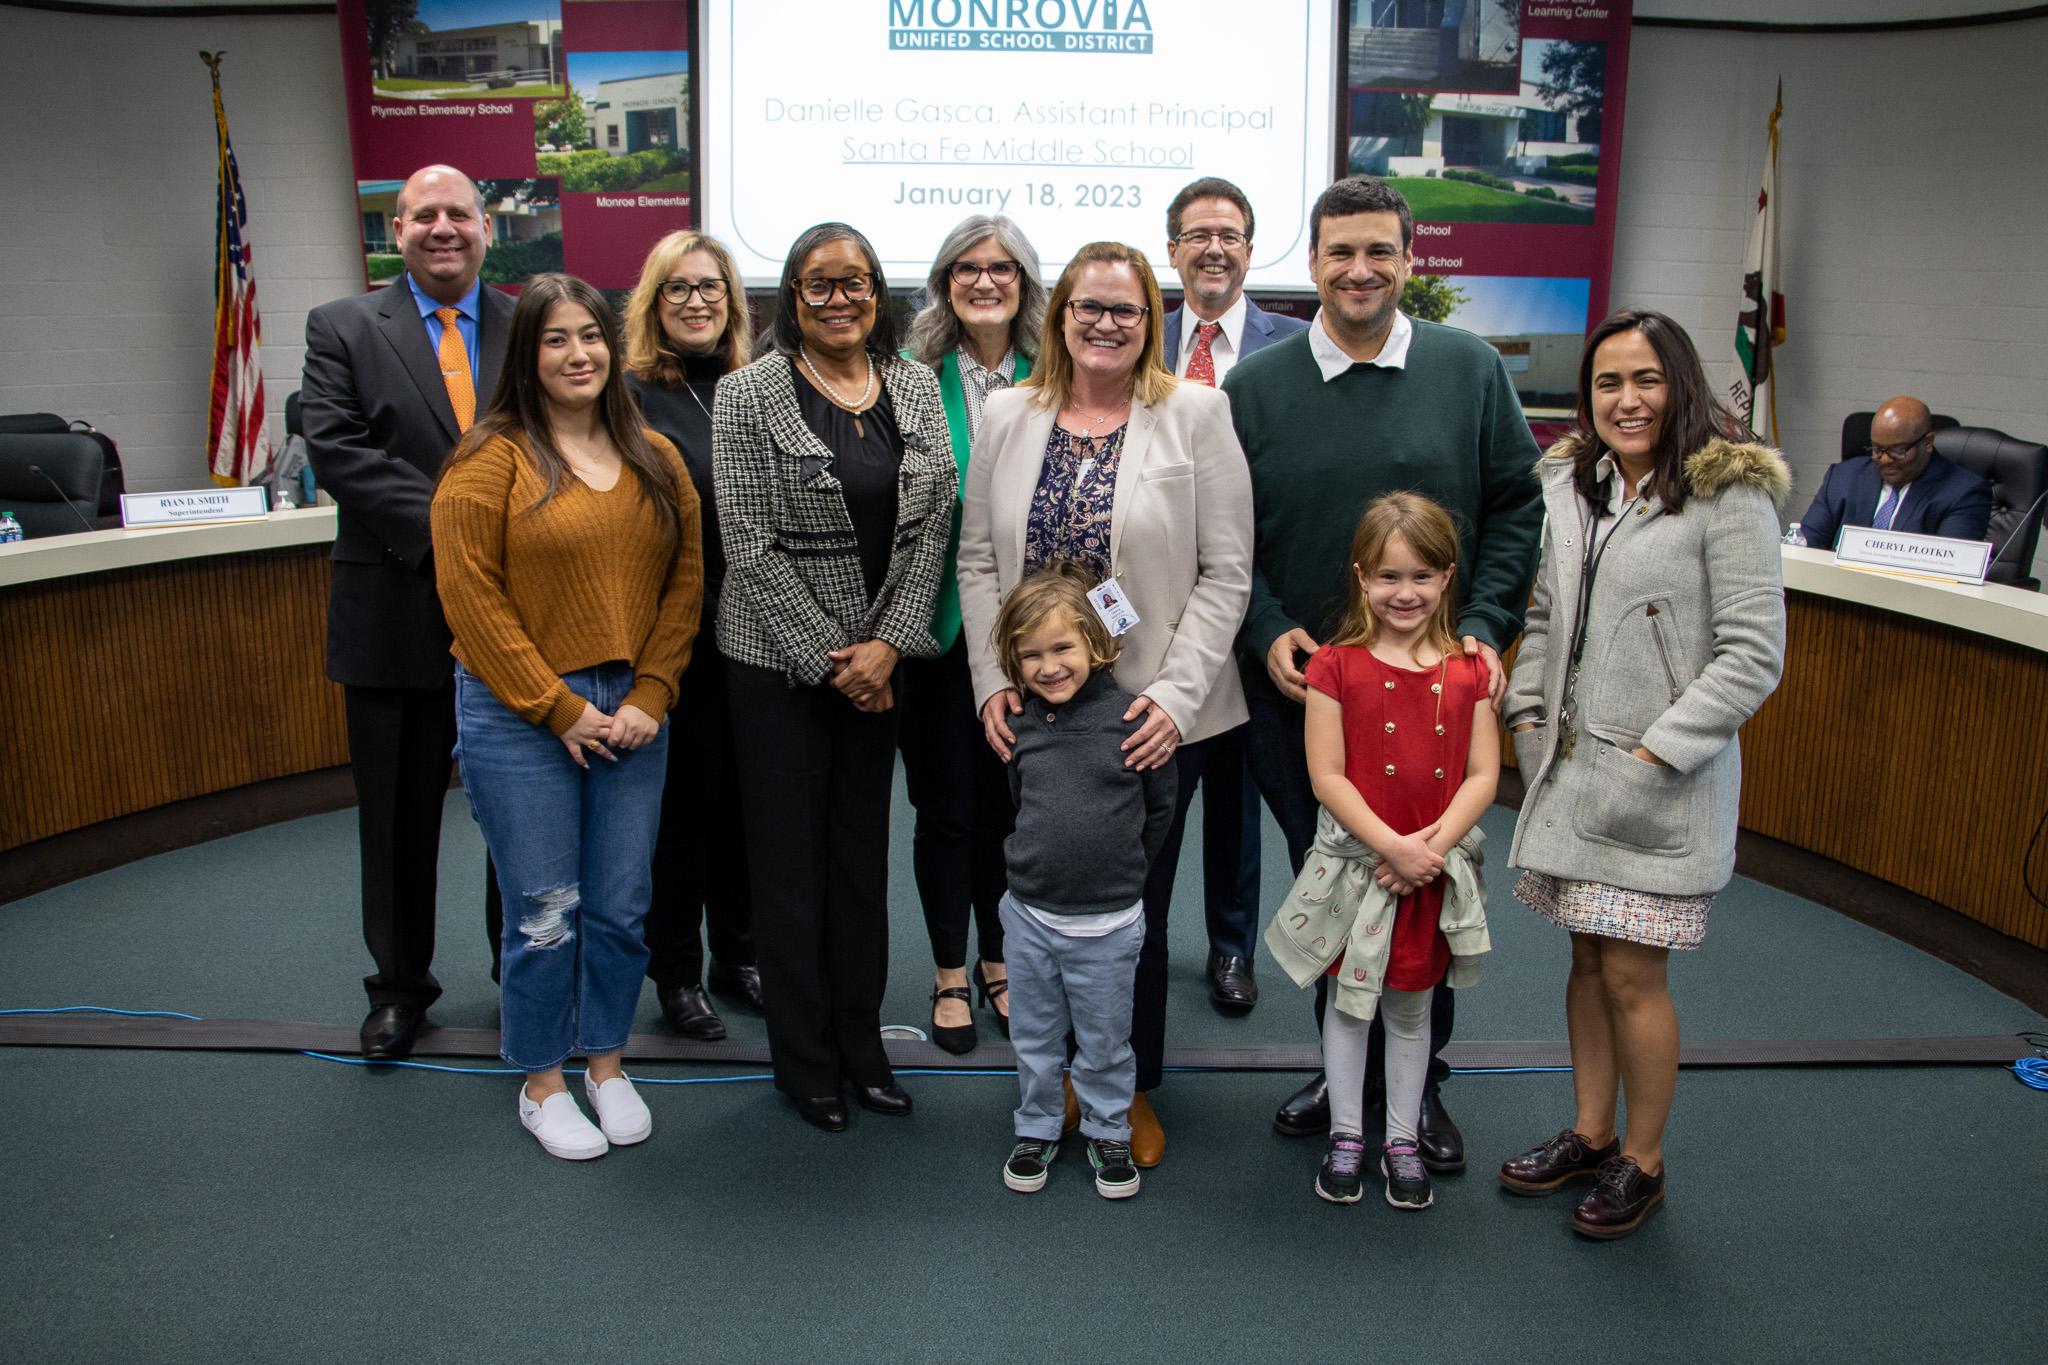 The Board welcomed Danielle Gasca as the new Assistant Principal at Santa Fe.